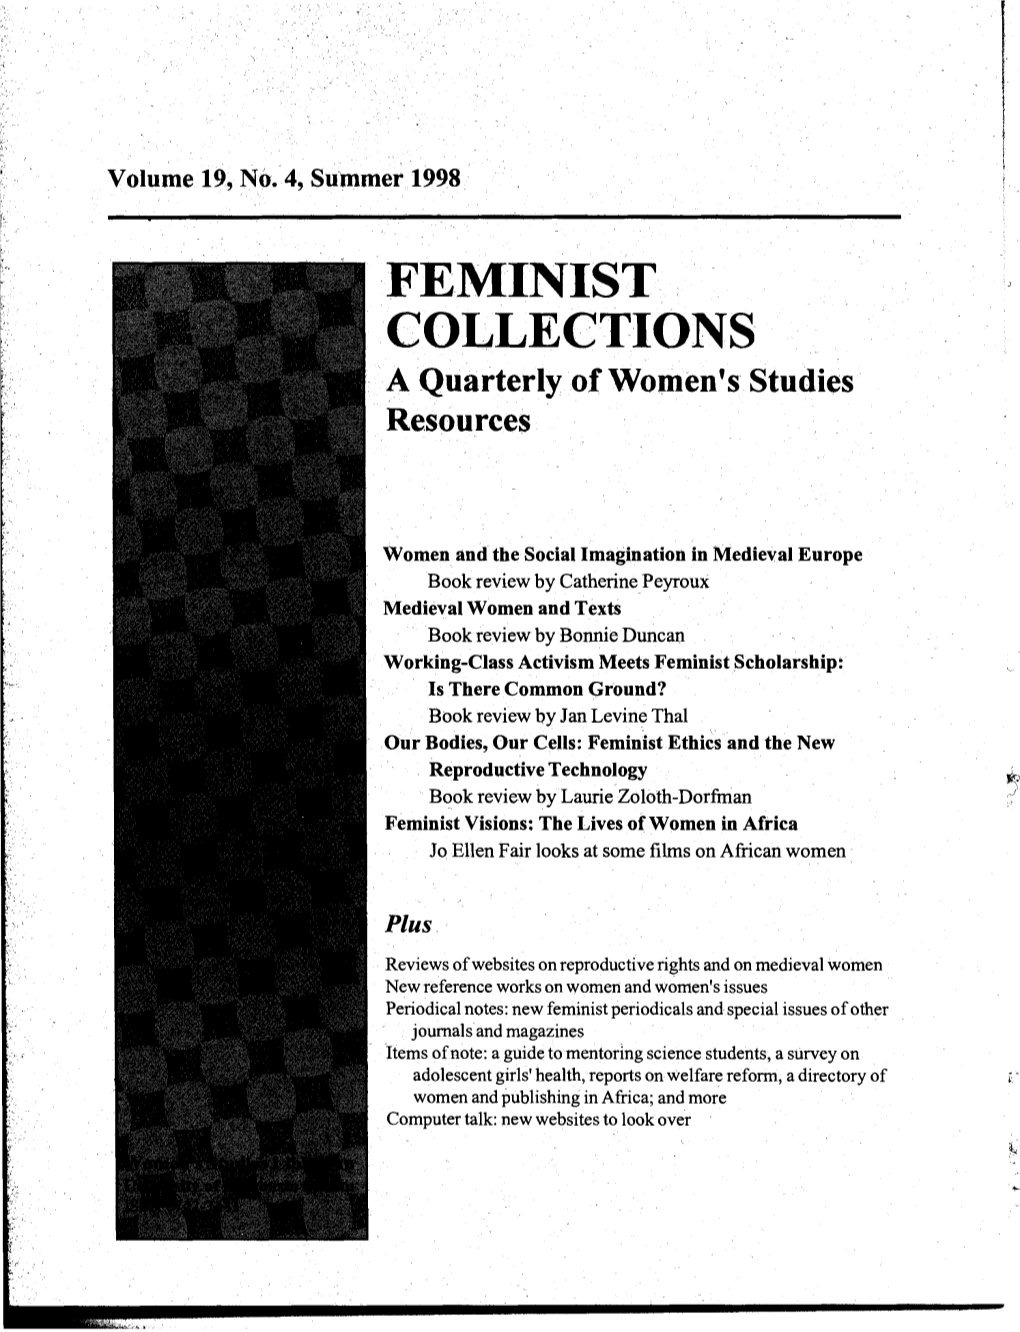 FEMINIST COLLECTIONS a Quarterly of Women's Studies Resources